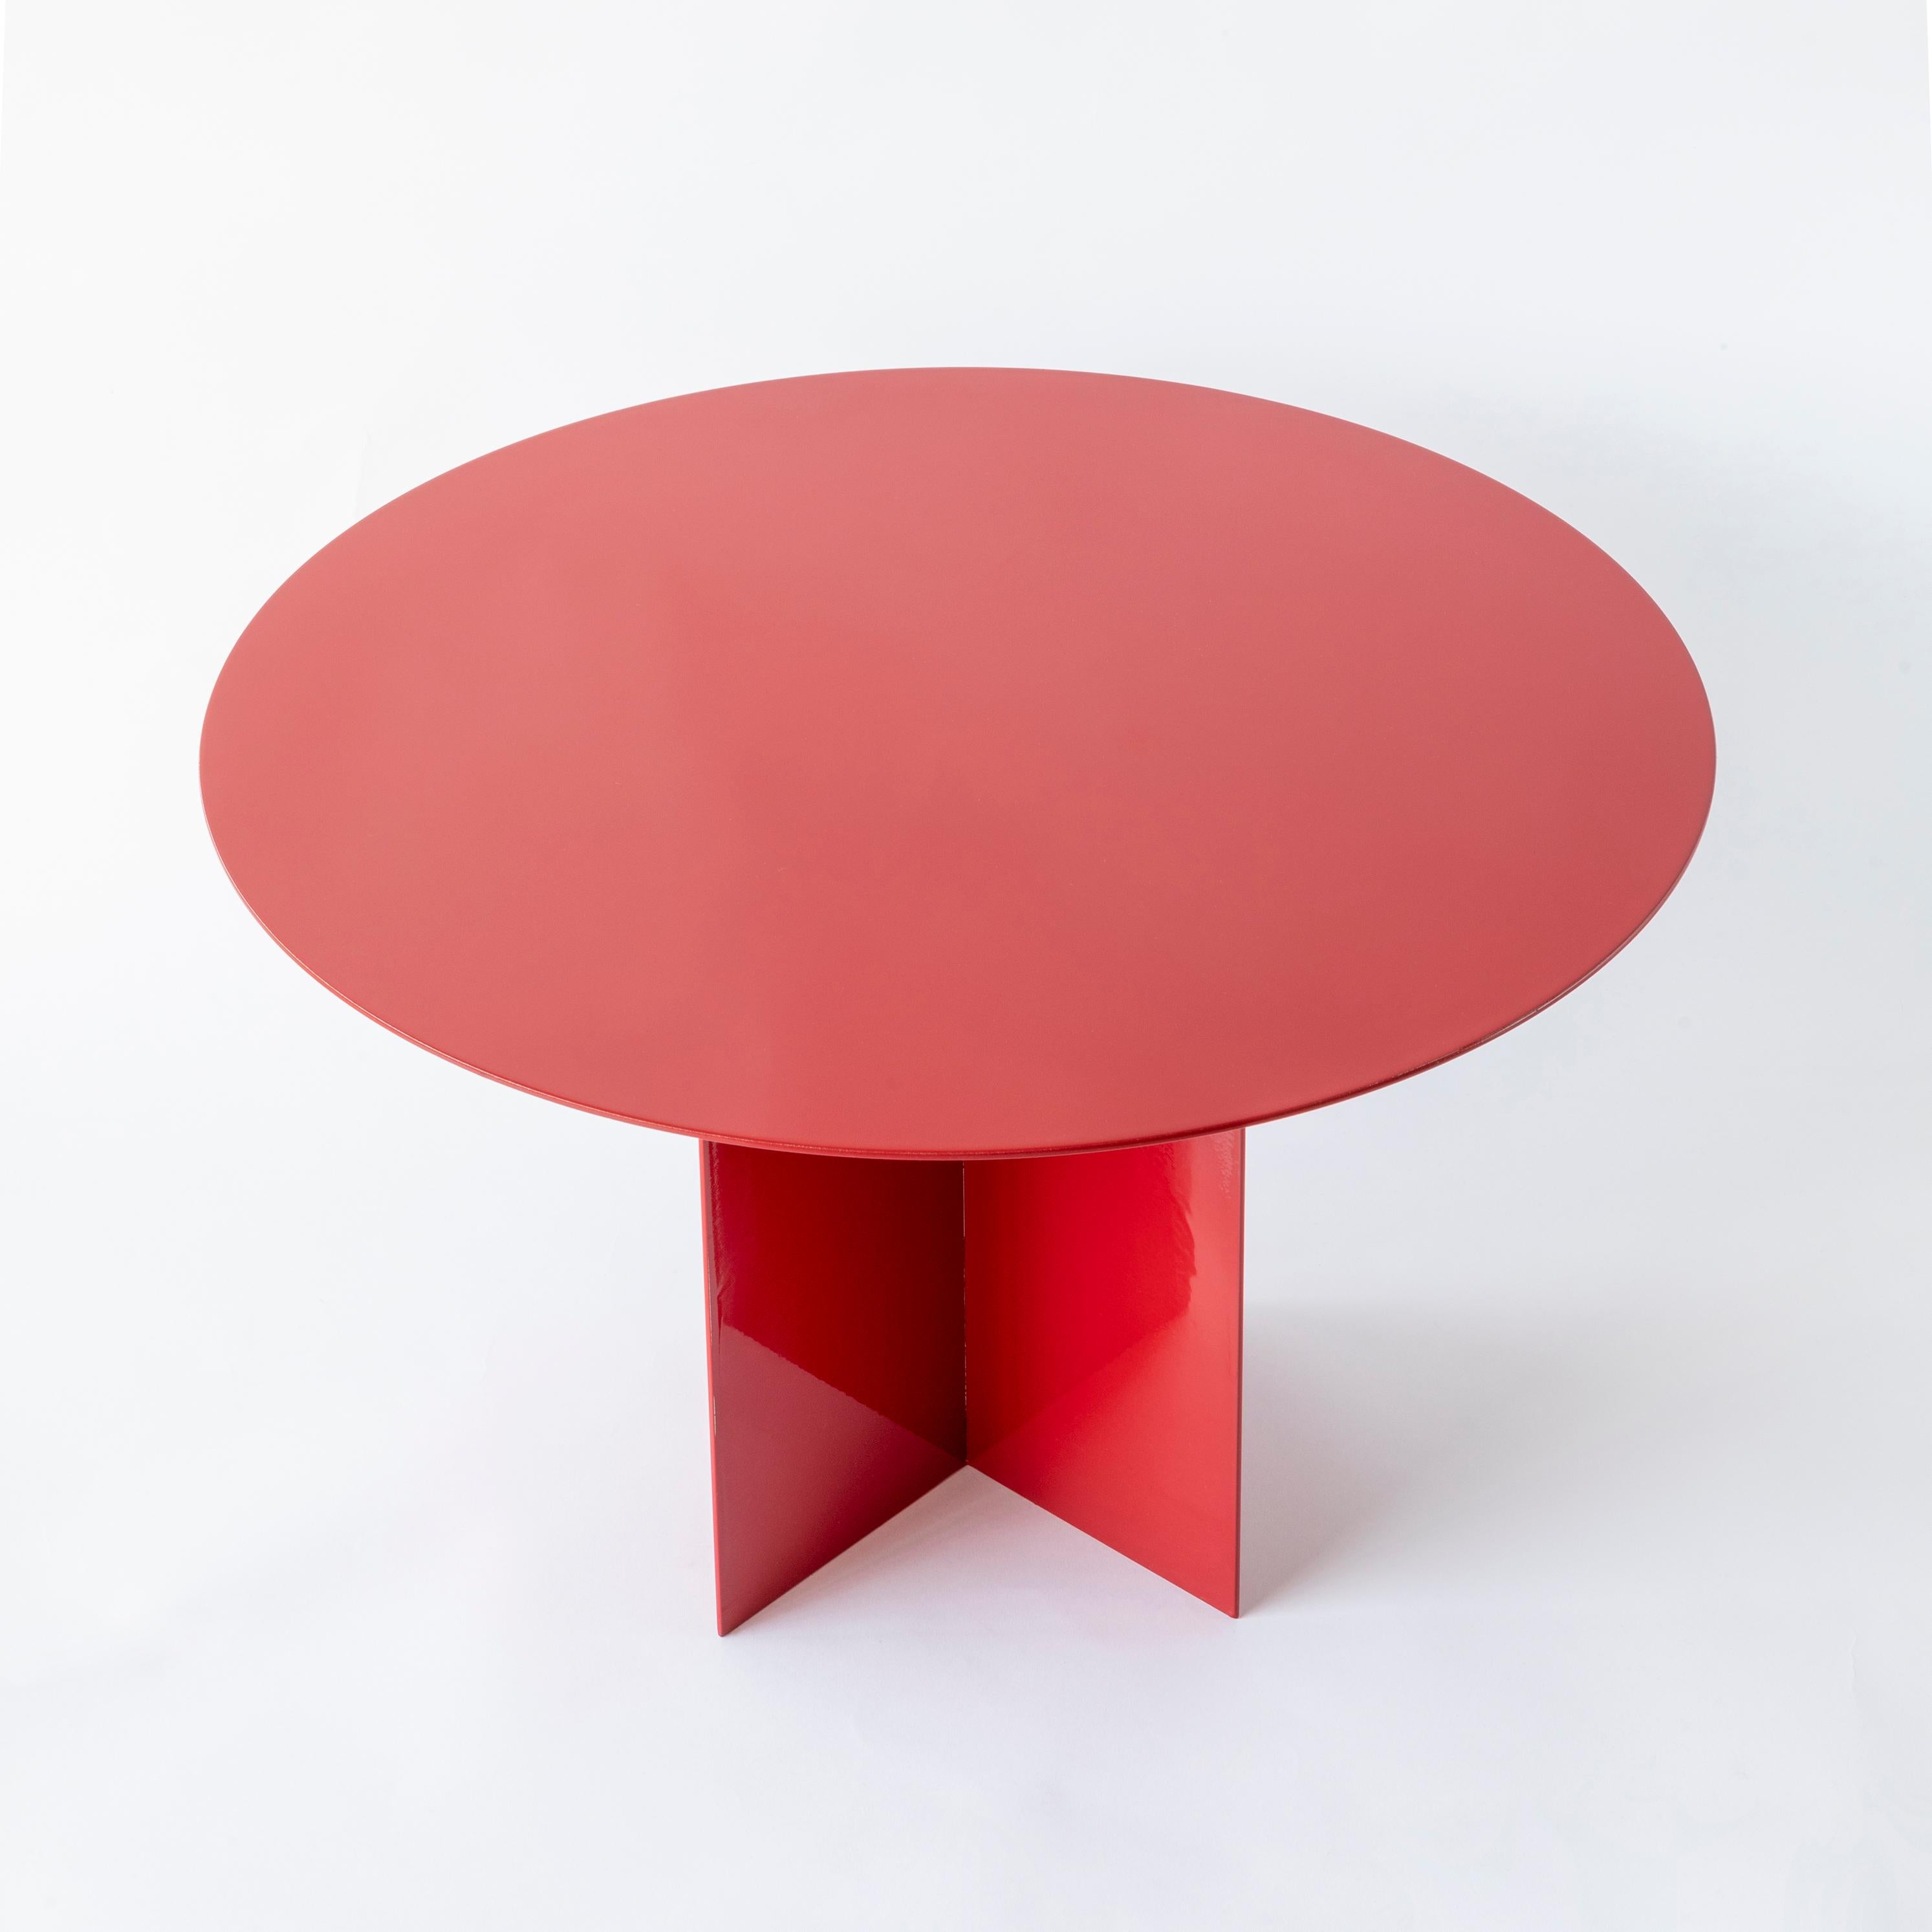 Across Large Round Red Coffee Table by Secondome Edizioni
Designer: Claudia Pignatale.
Dimensions: Ø 45 x H 50 cm.
Materials: Iron.

Collection / Production: Secondome. This piece can be customized. Available finishes: any RAL color. Please contact